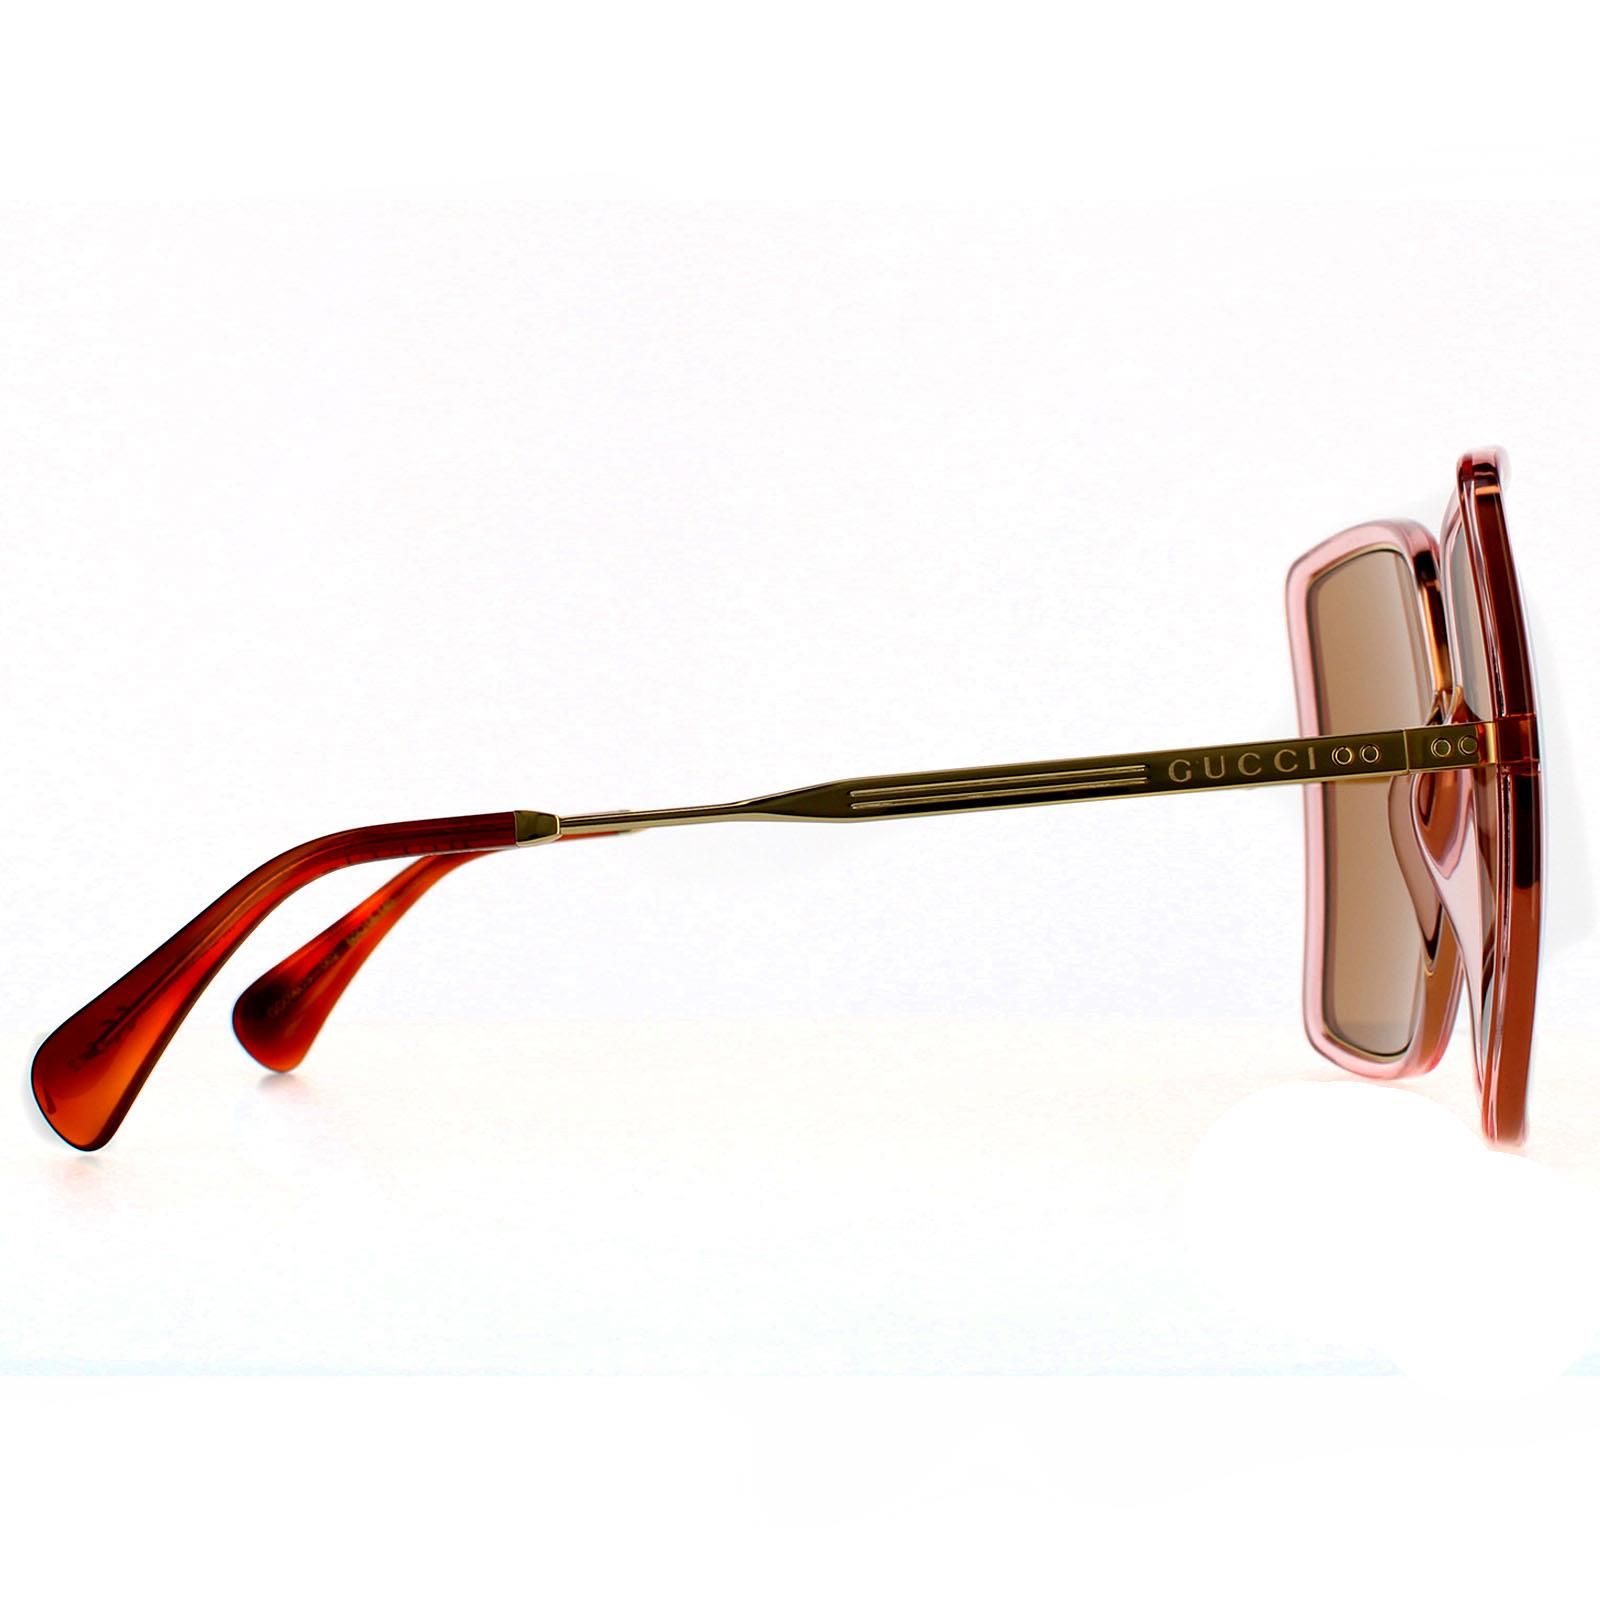 Gucci Square Womens Pink Crystal and Gold  Brown Sunglasses Gucci have super oversized square lenses with plastic rims and contrasting slim metal temples and bridge. Stripes are engraved into the  metal, as well as the Gucci logo on the temples.